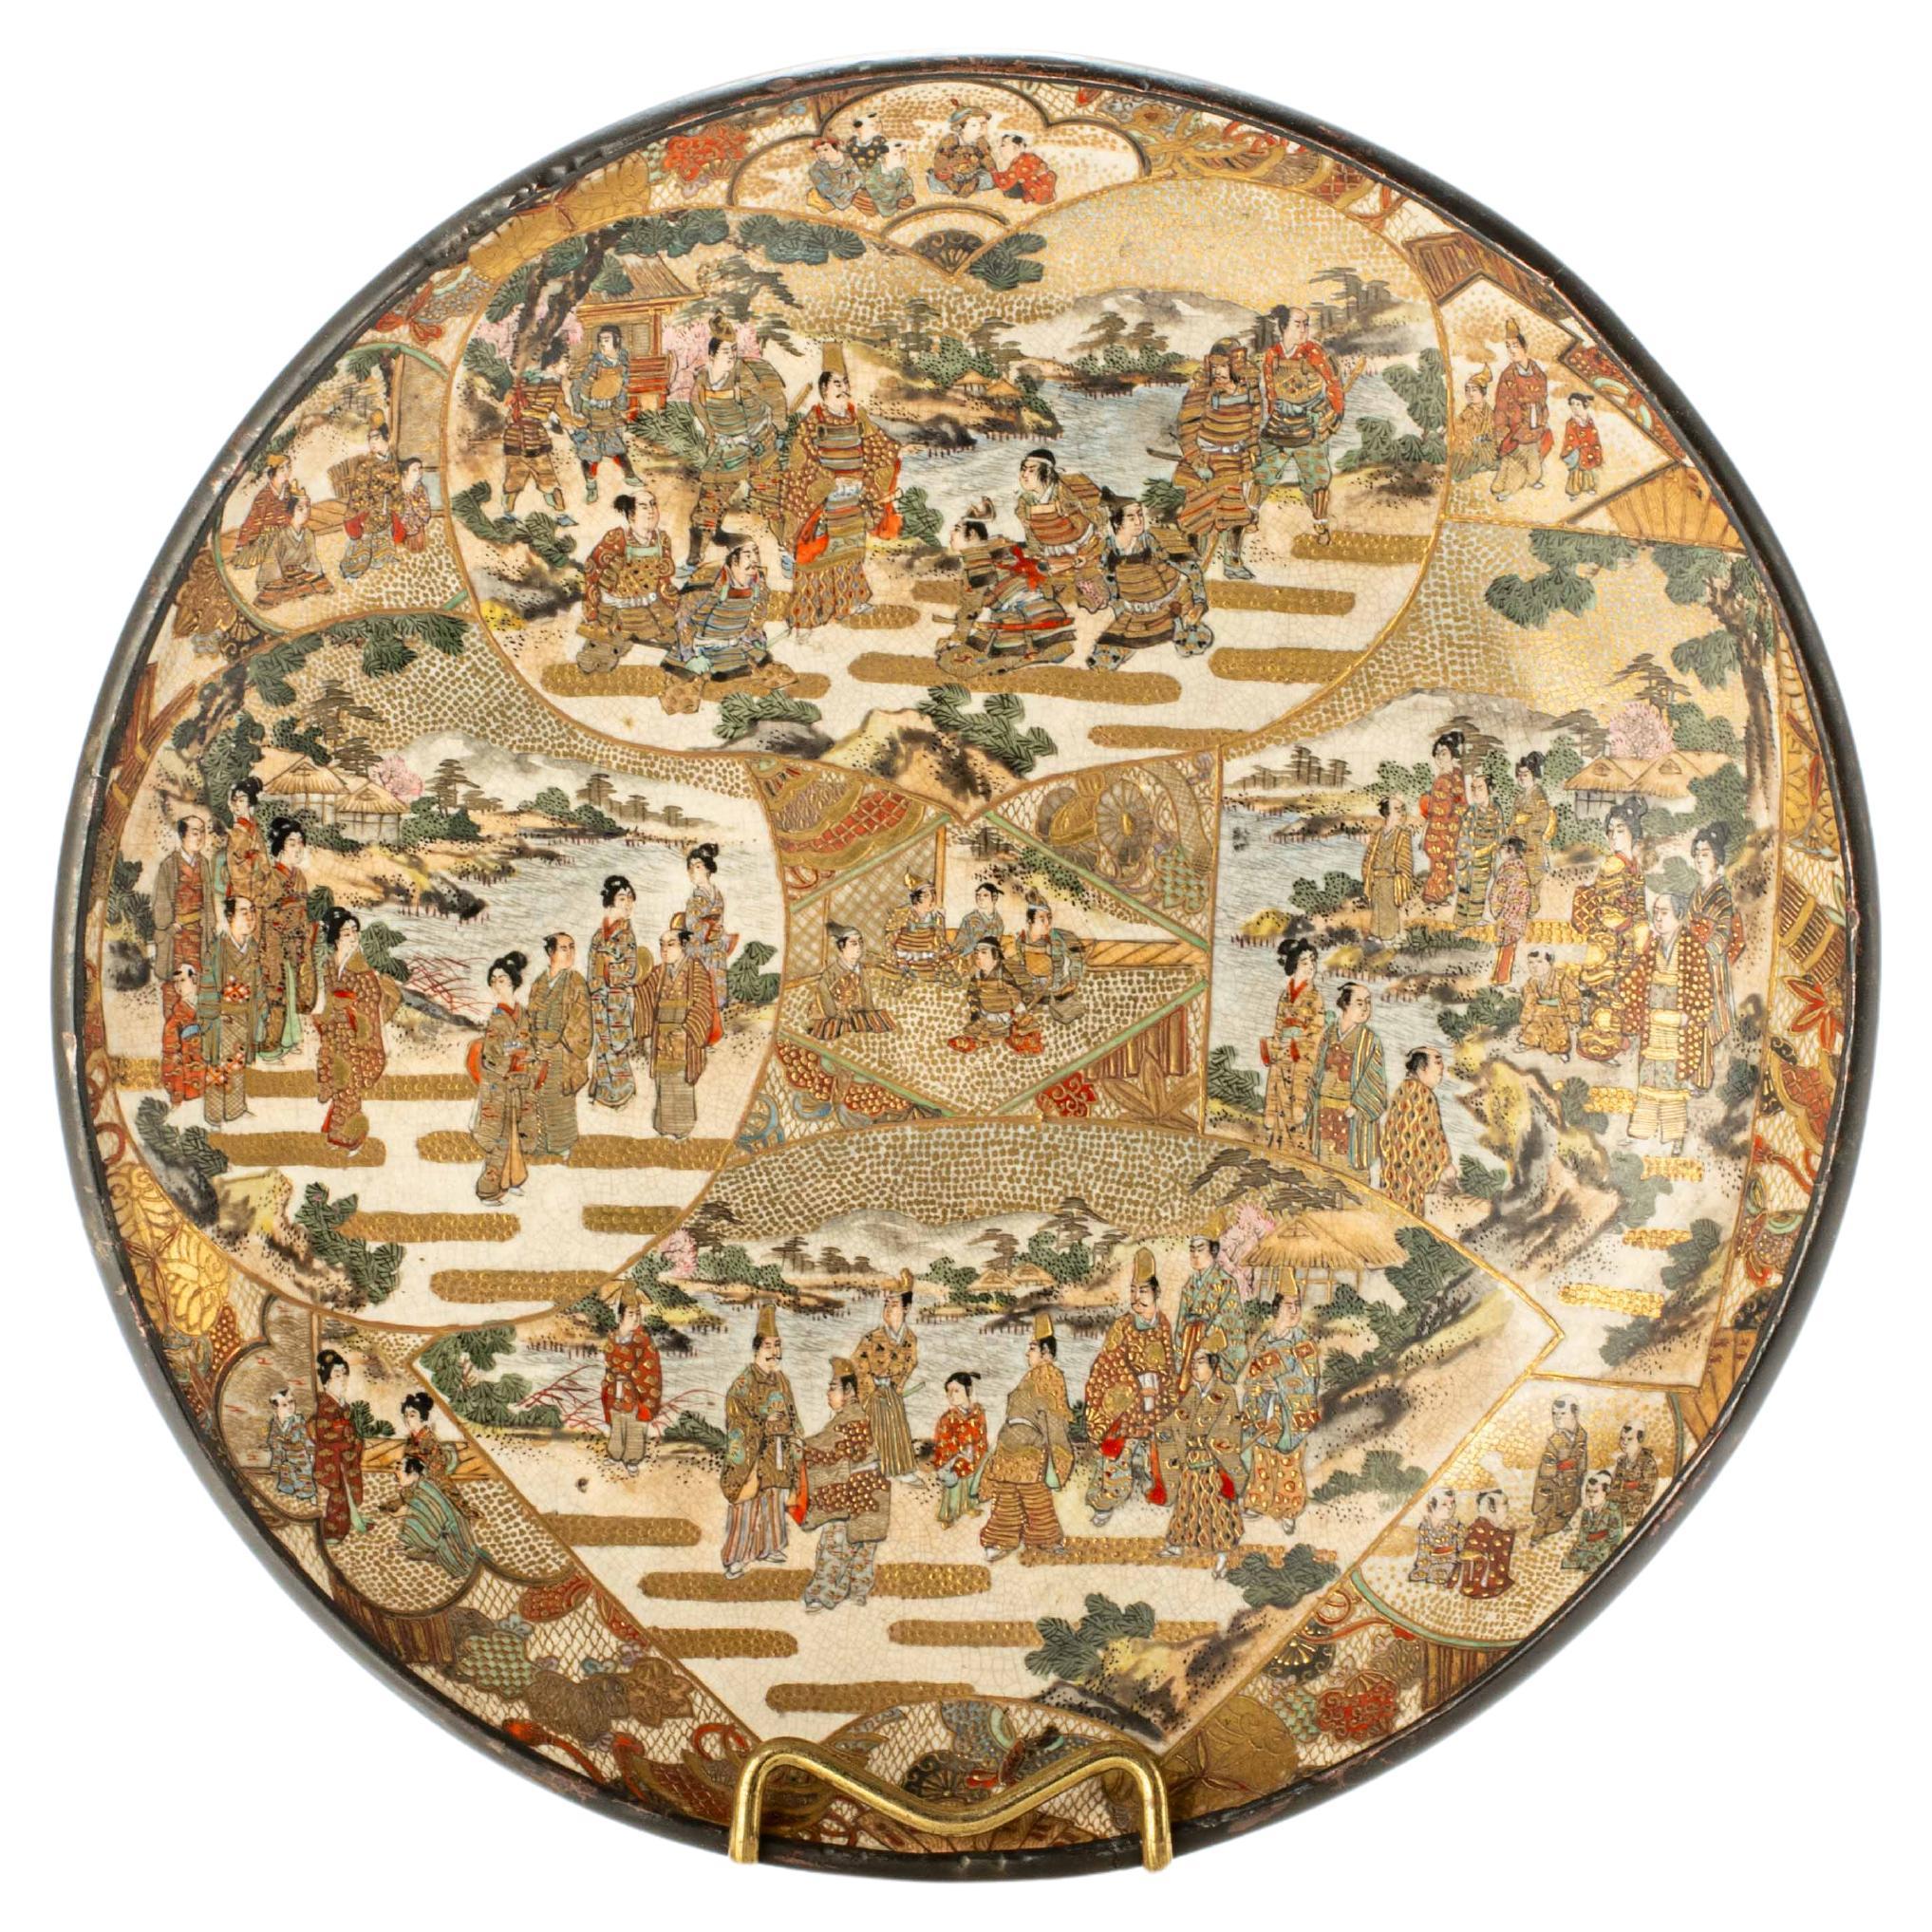 Satsuma ceramic plate adorned with polychrome and gold decorations For Sale